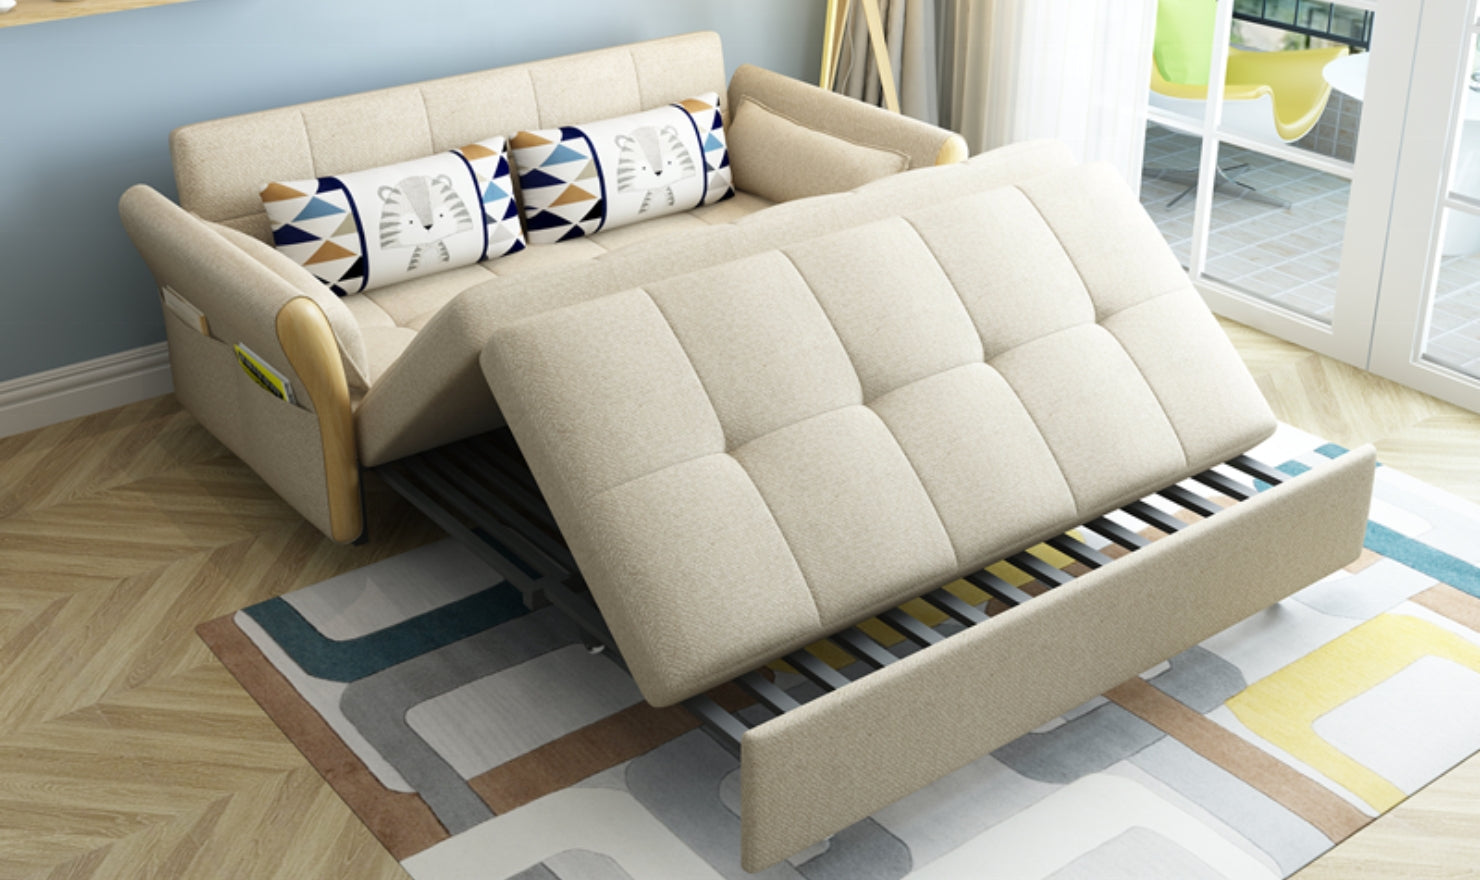 TIPS TO TAKE APART A SLEEPER SOFA FOR MOVING - Fold up the bedframe again